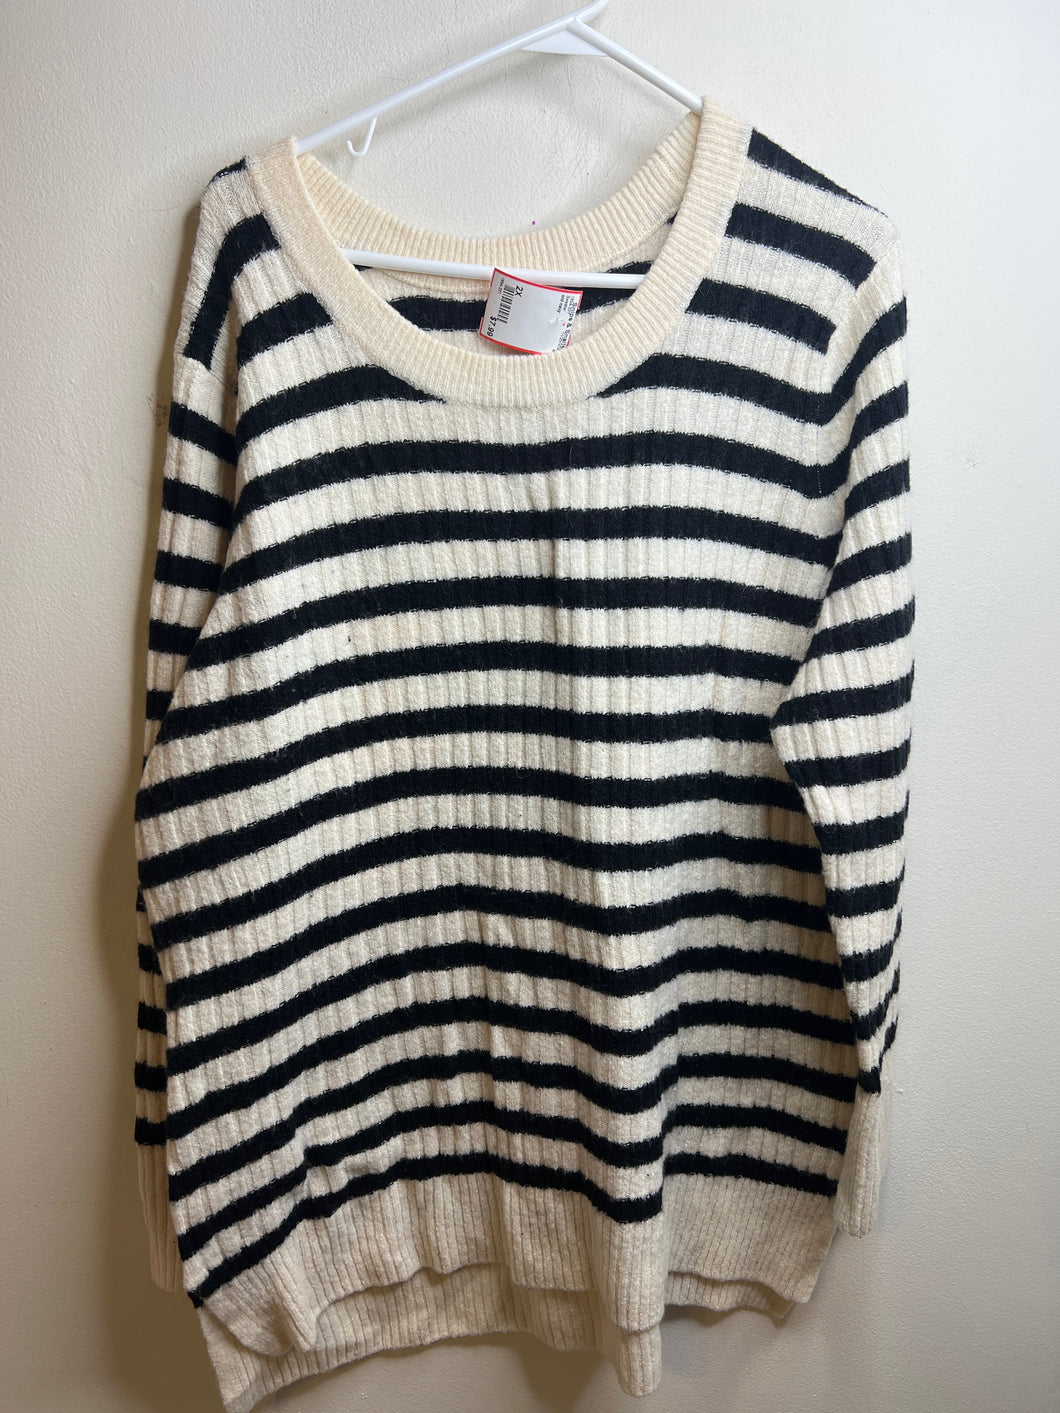 Womens Size 2X old navy black/cream striped Sweater